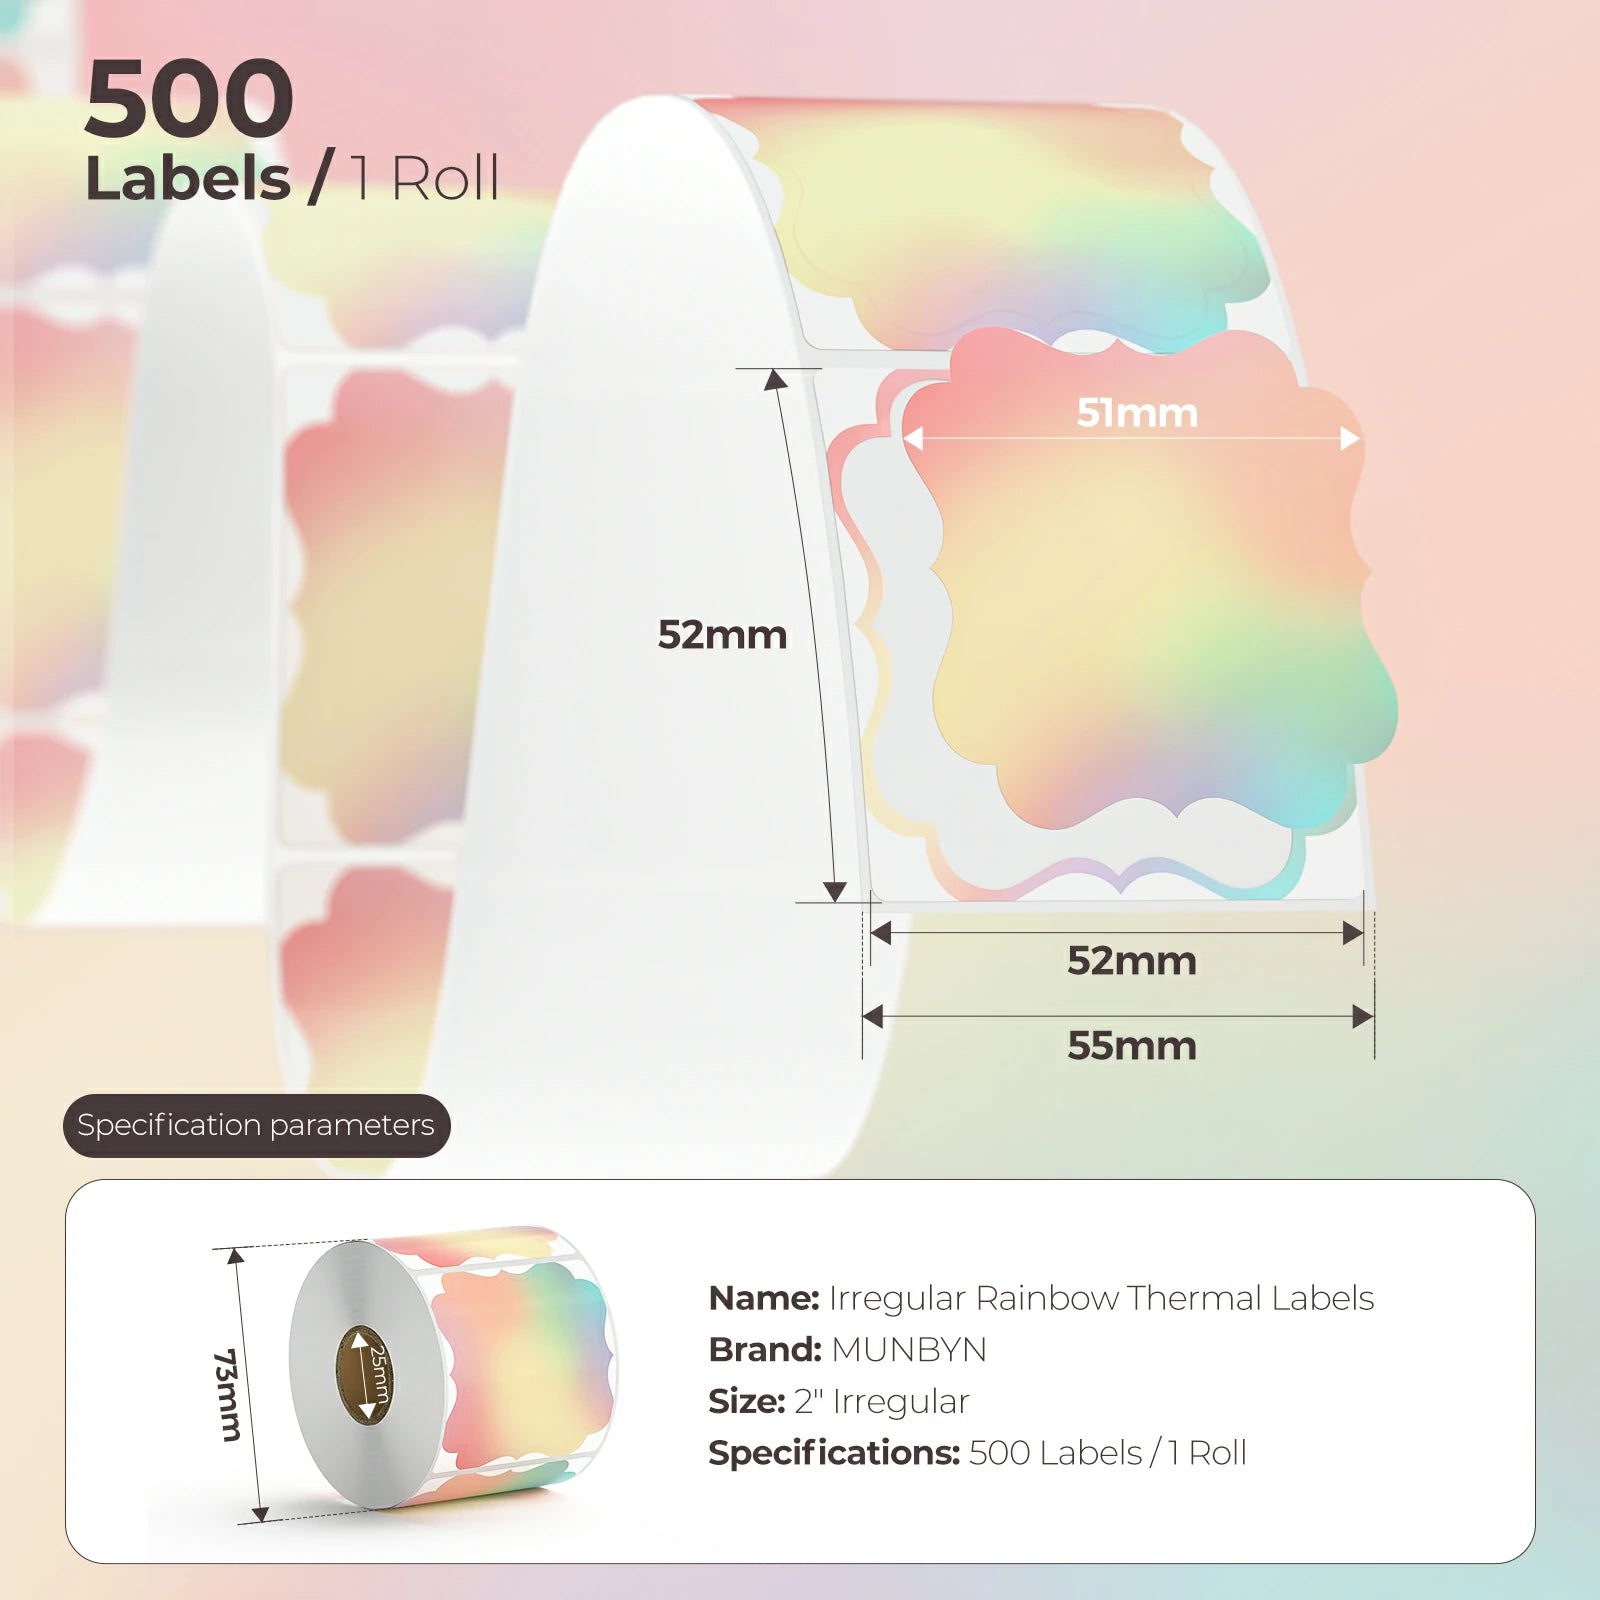 MUNBYN rainbow-coloured fancy square labels 500 labels per roll.